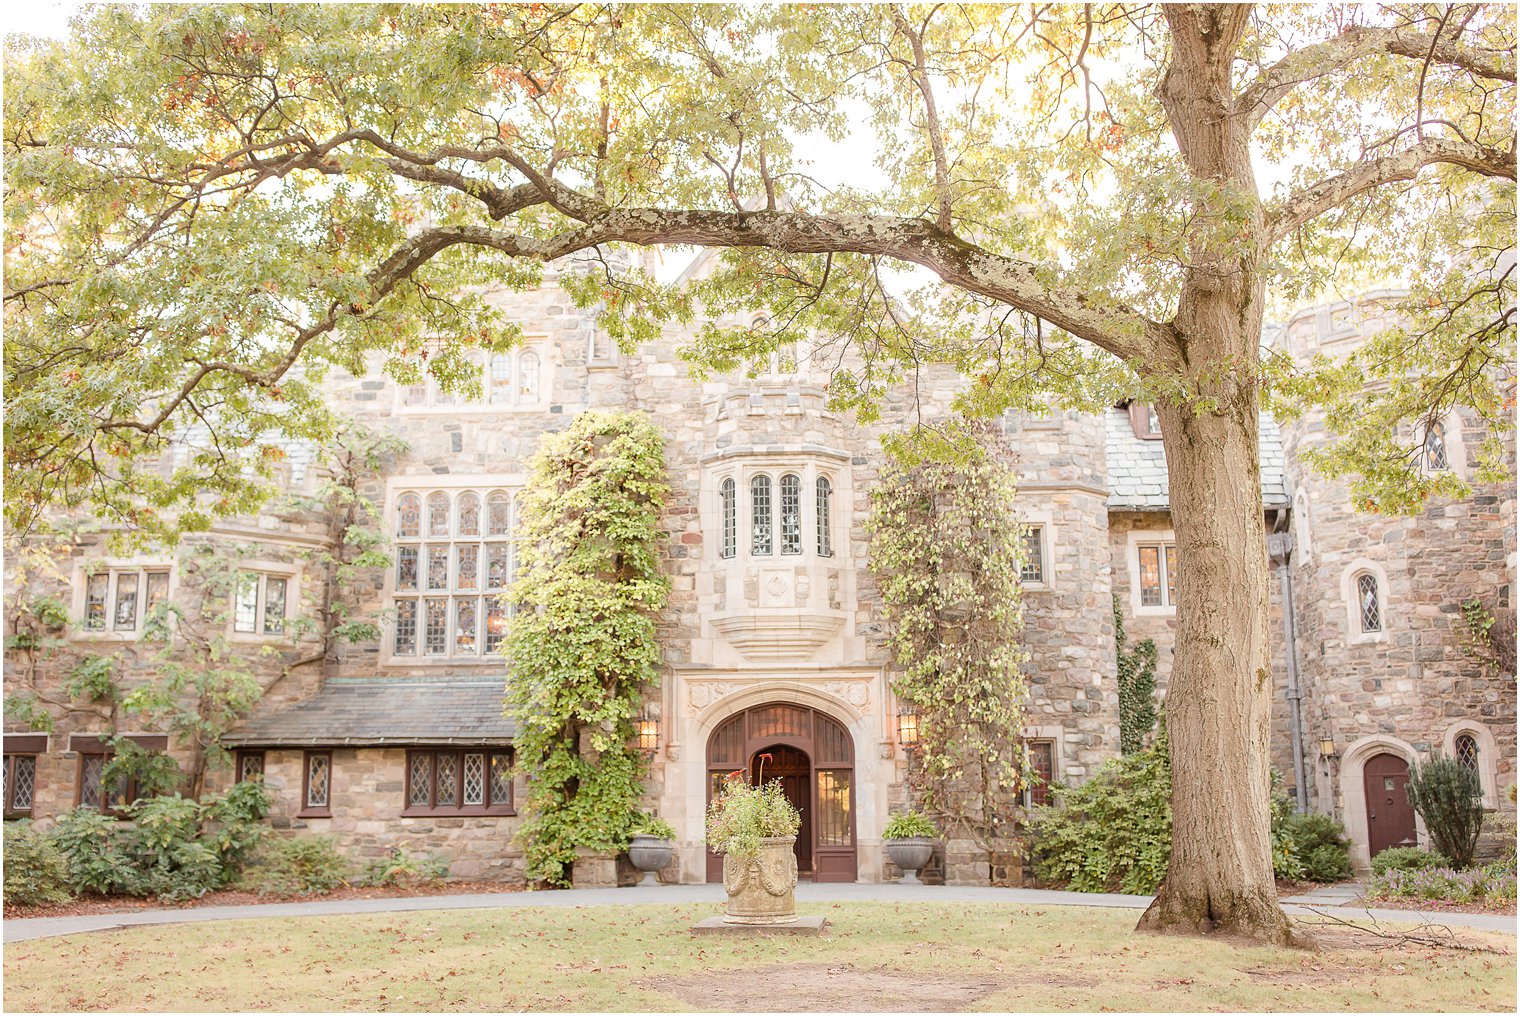 photo of the castle at Skylands Manor in Ringwood NJ